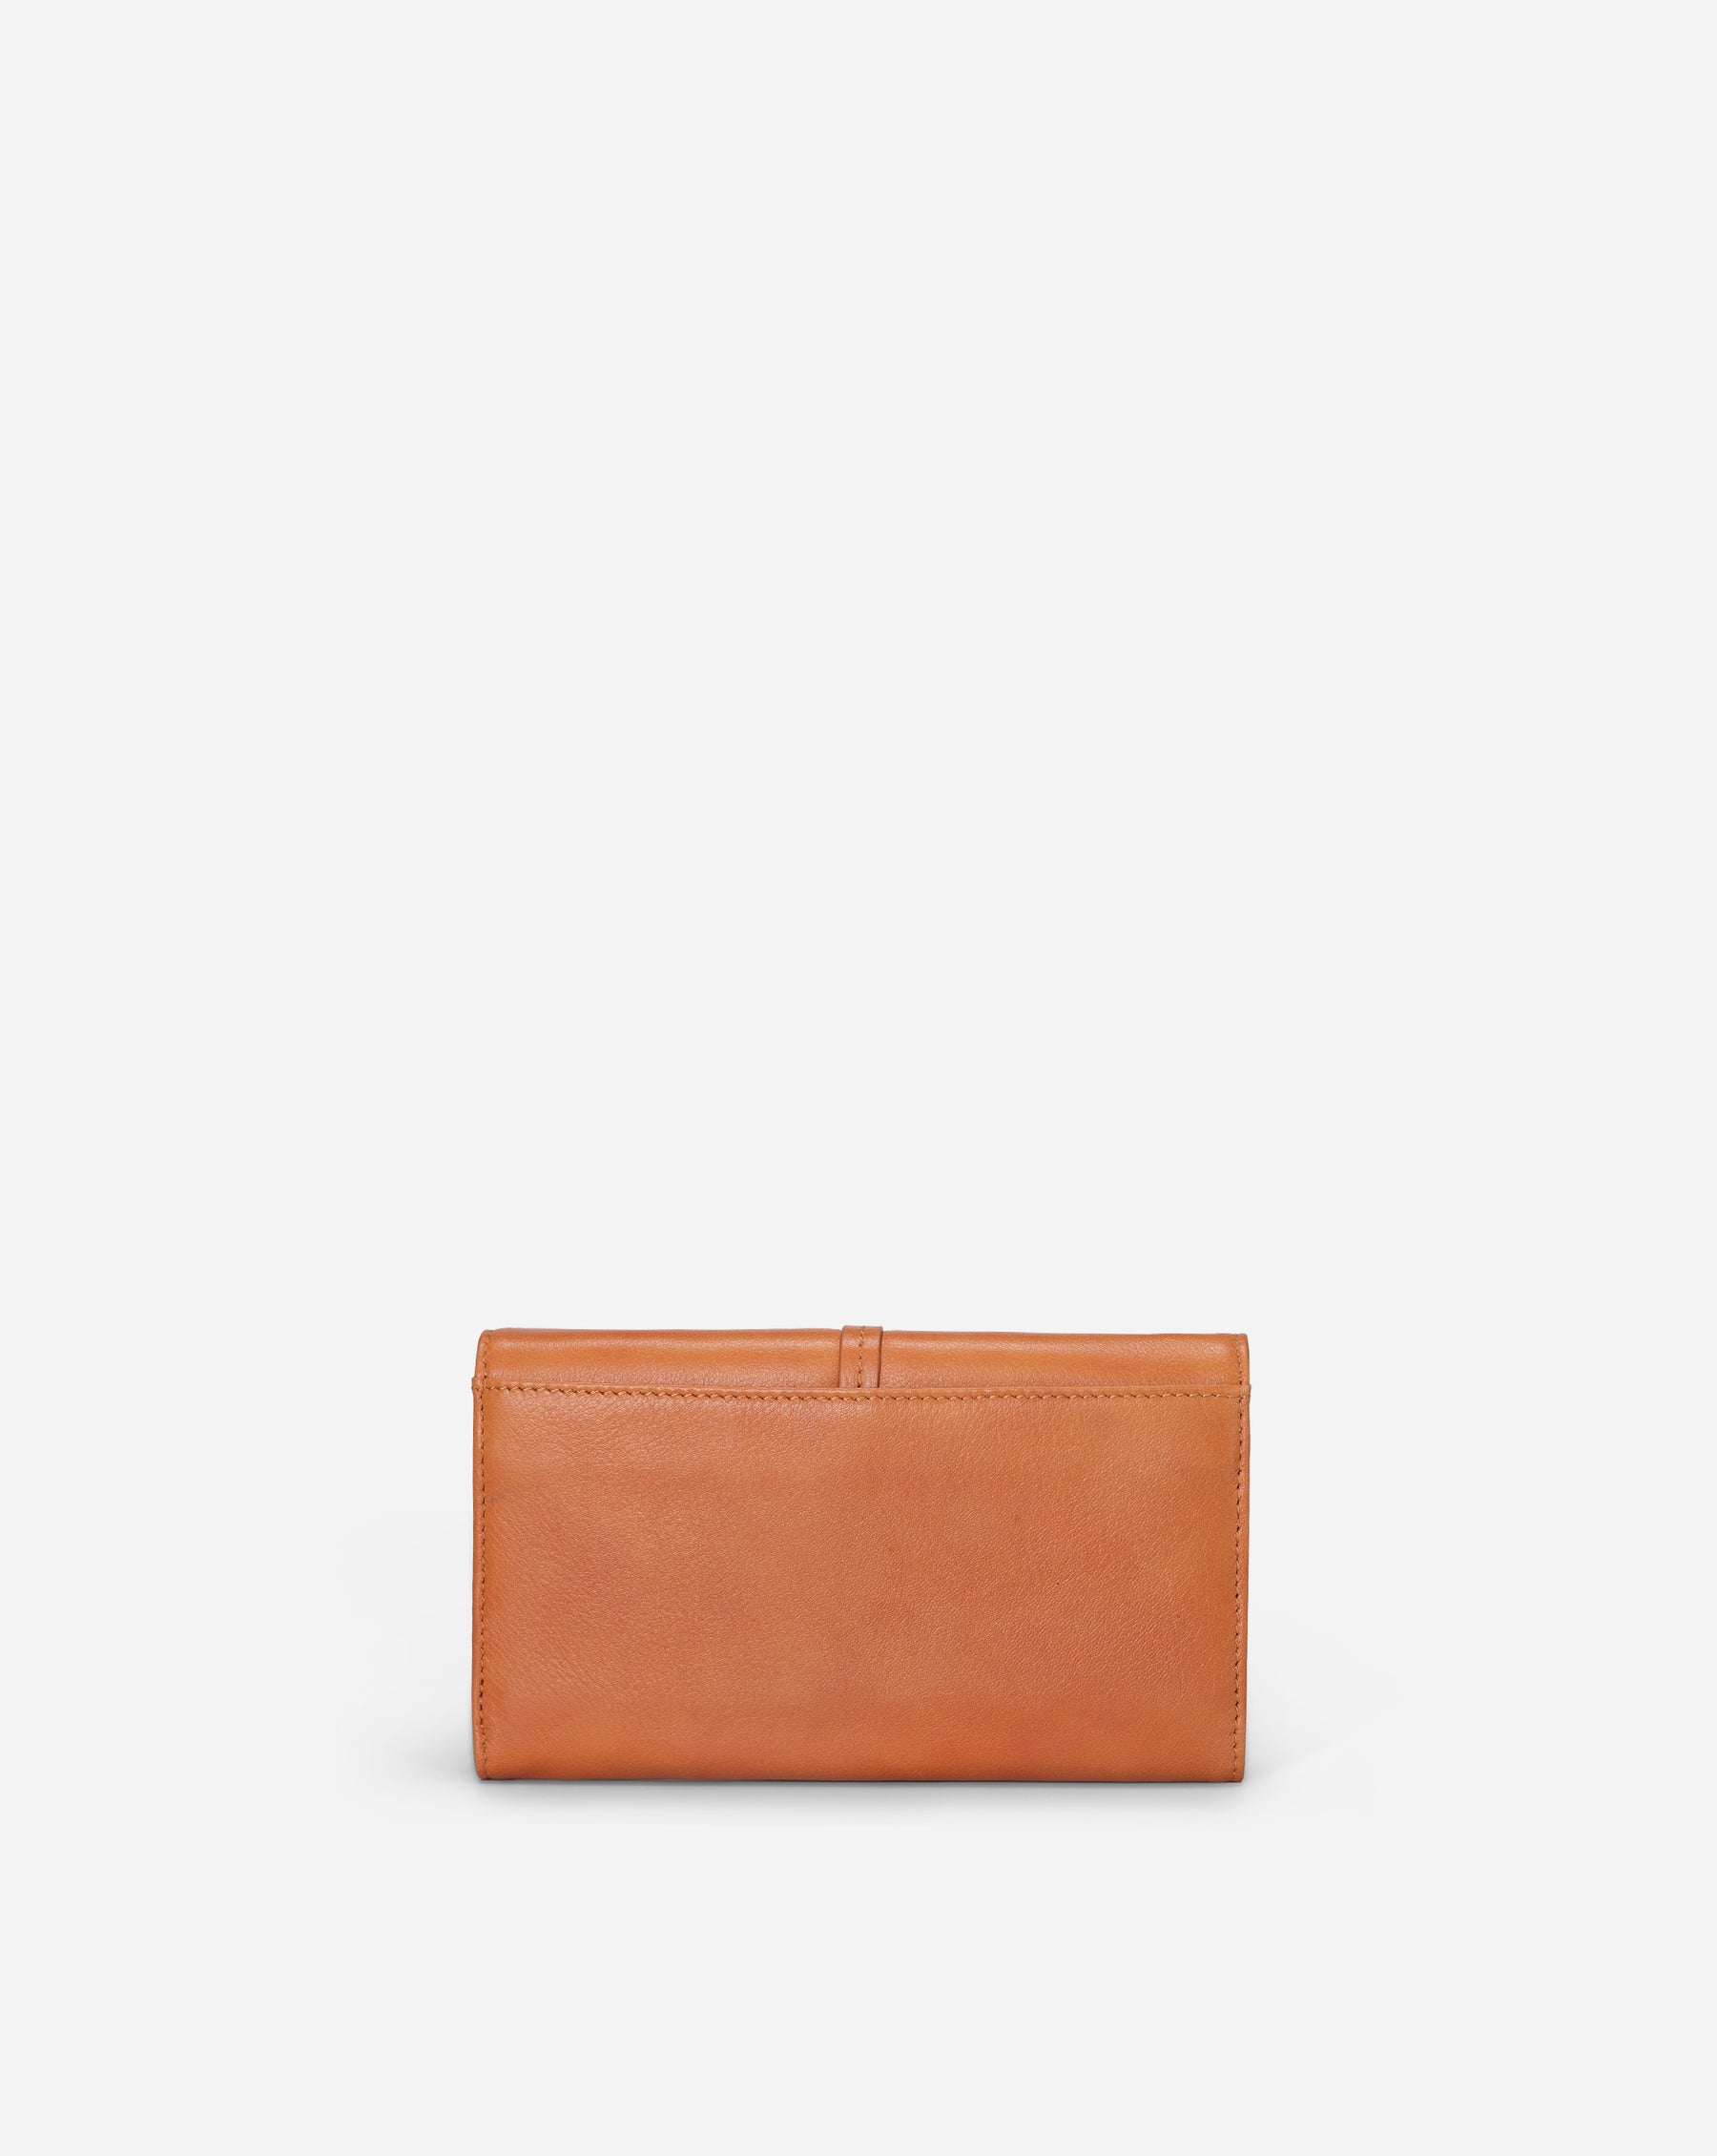 Persephone Trifold Wallet